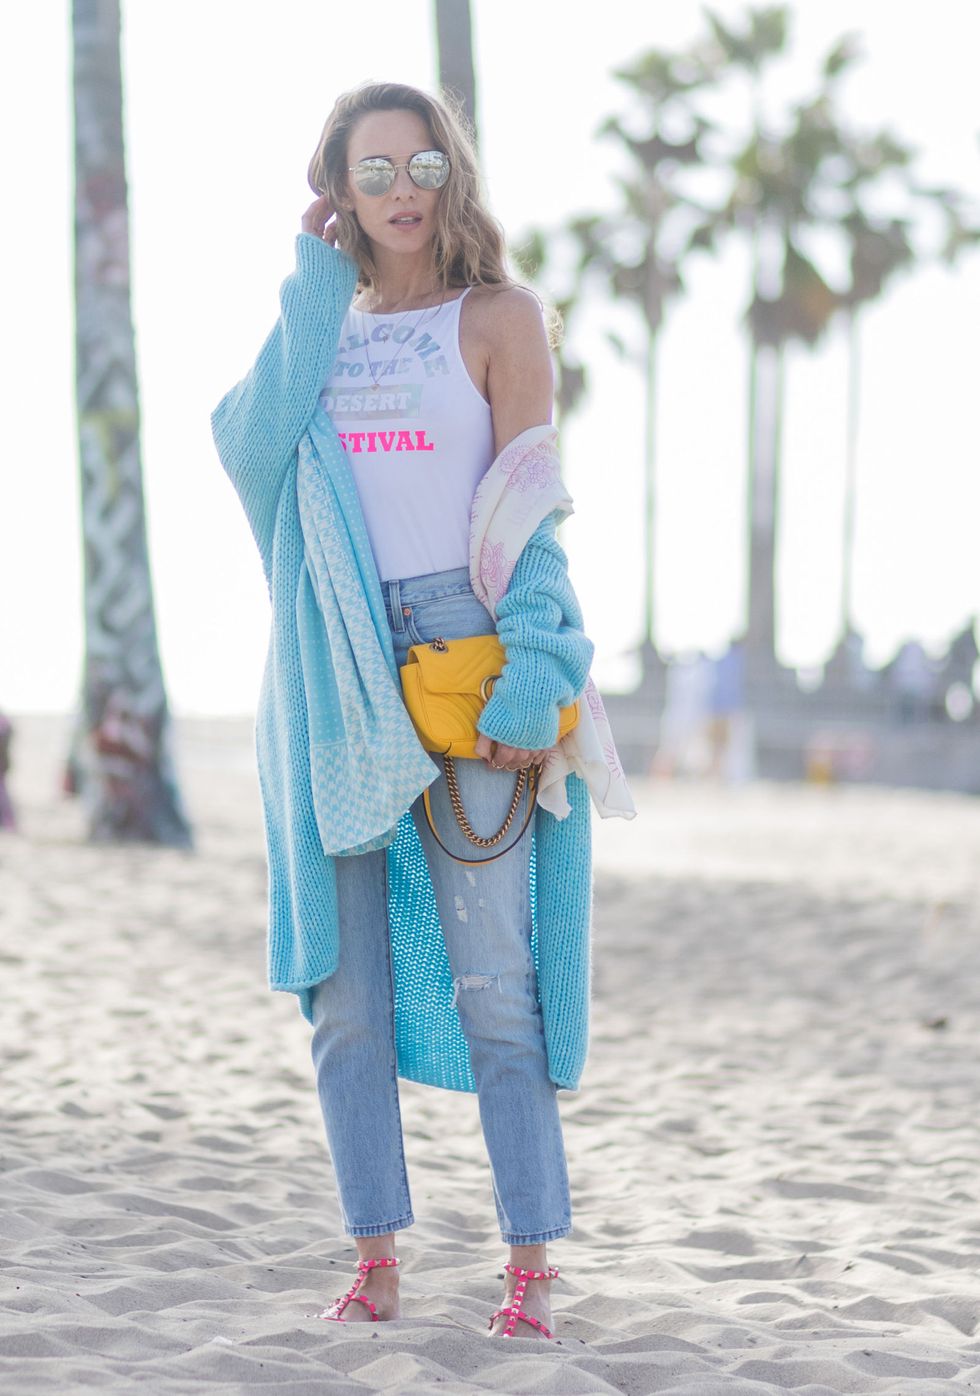 Photograph, Clothing, Blue, Turquoise, Street fashion, Yellow, Shoulder, Pink, Fashion, Joint, 